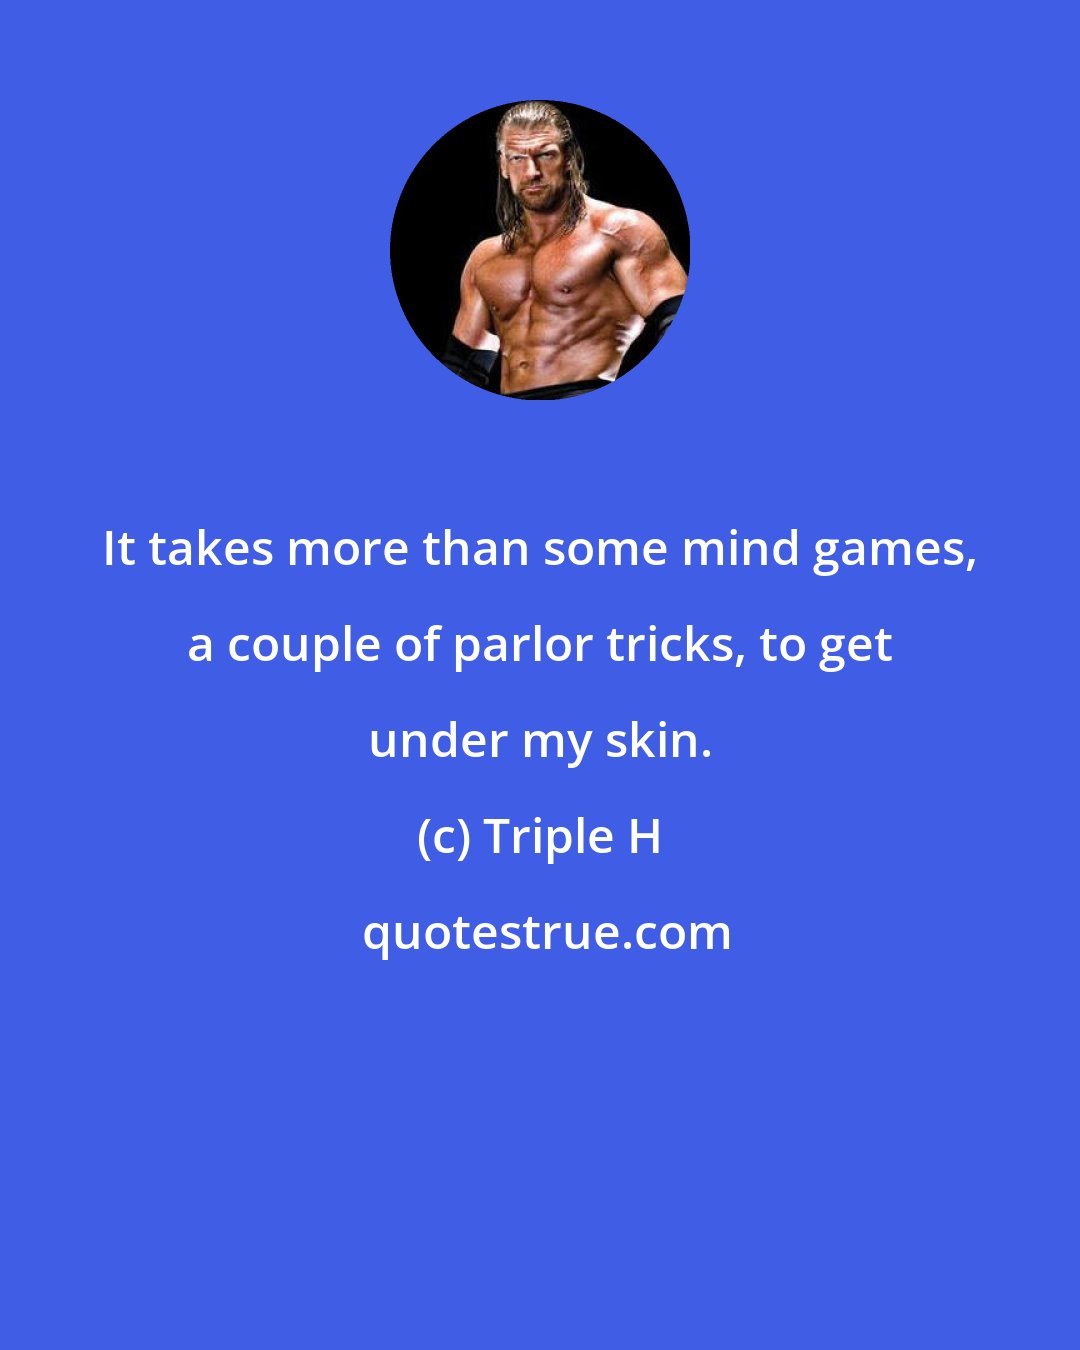 Triple H: It takes more than some mind games, a couple of parlor tricks, to get under my skin.